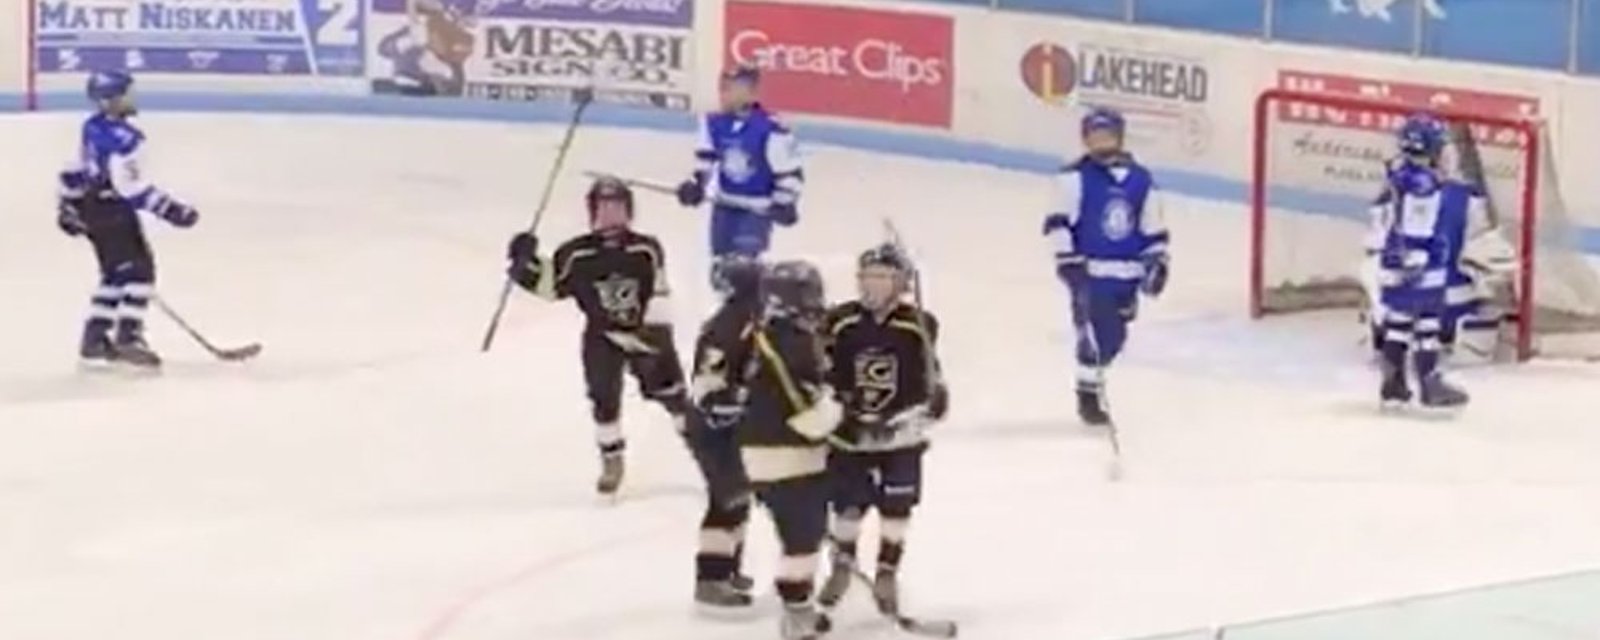 10-year-old pulls Lacrosse goal during game! 